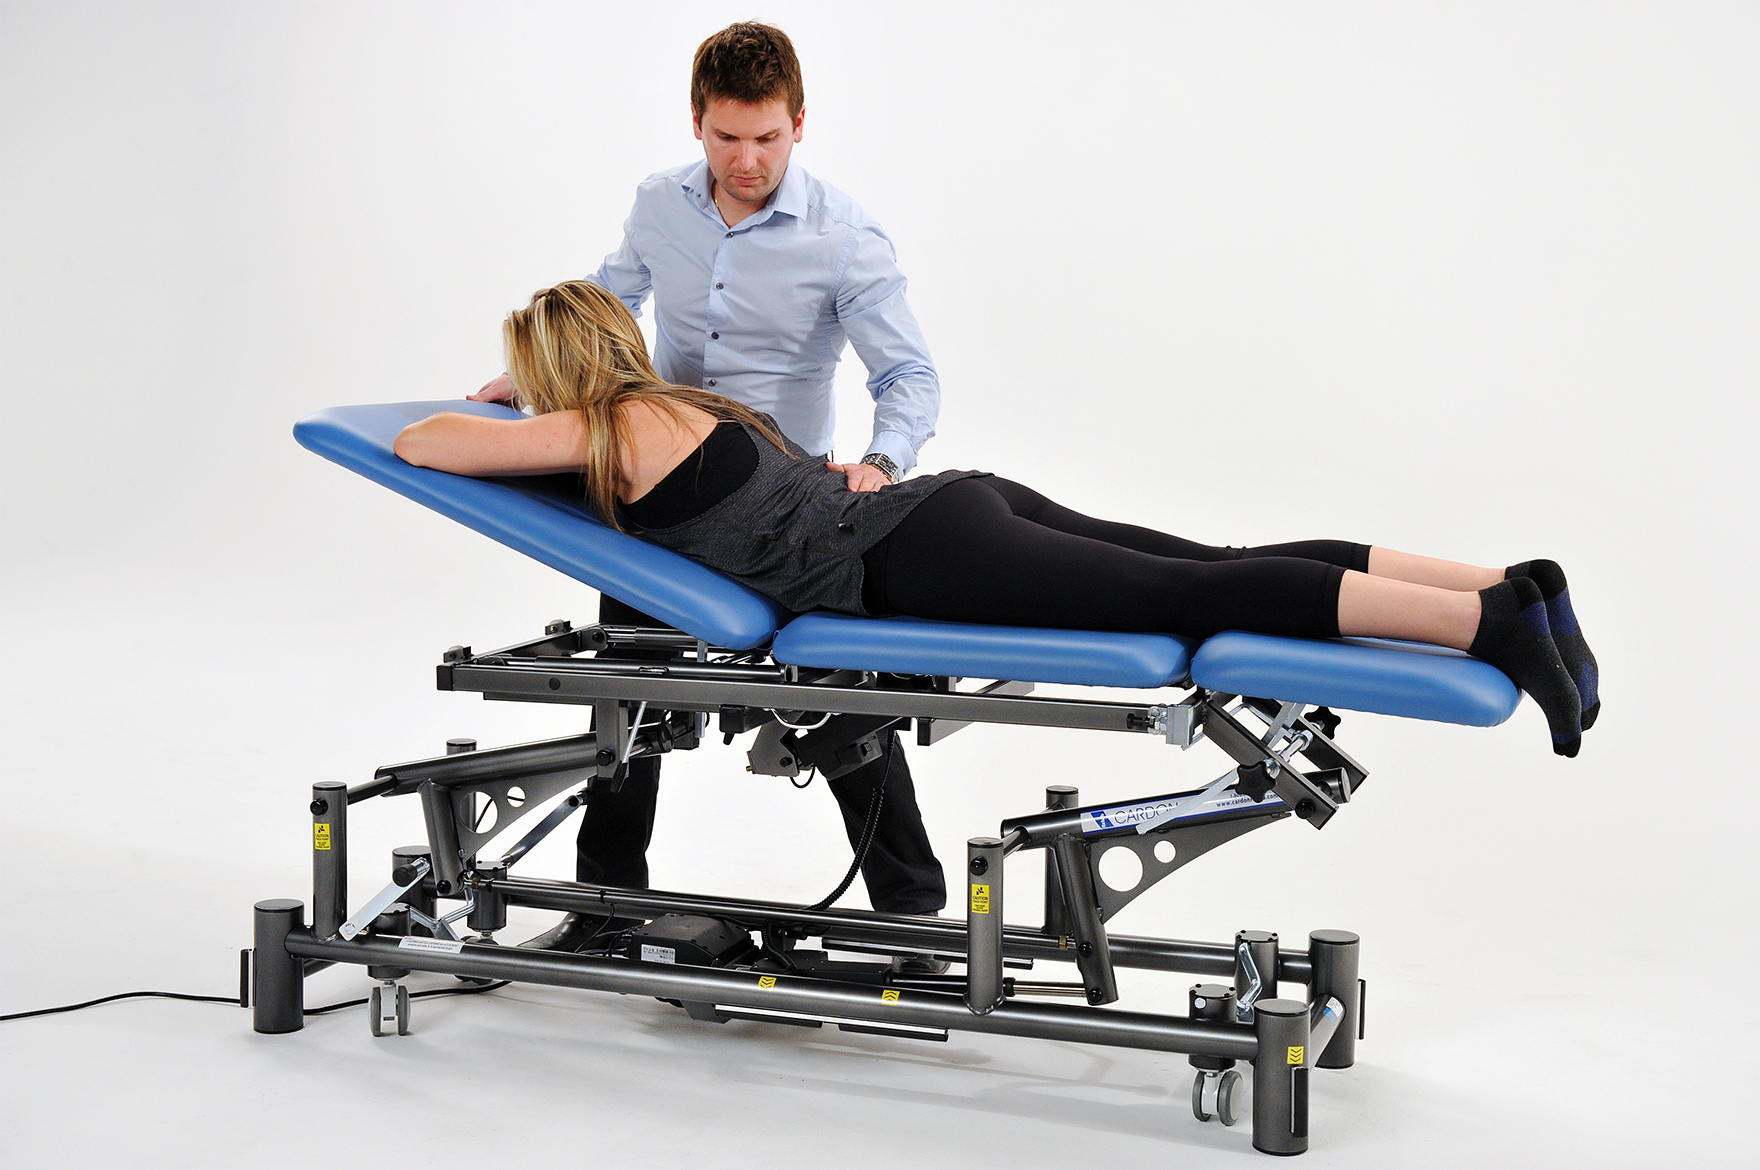 North America's Best Physical Therapy Treatment Table Cardon